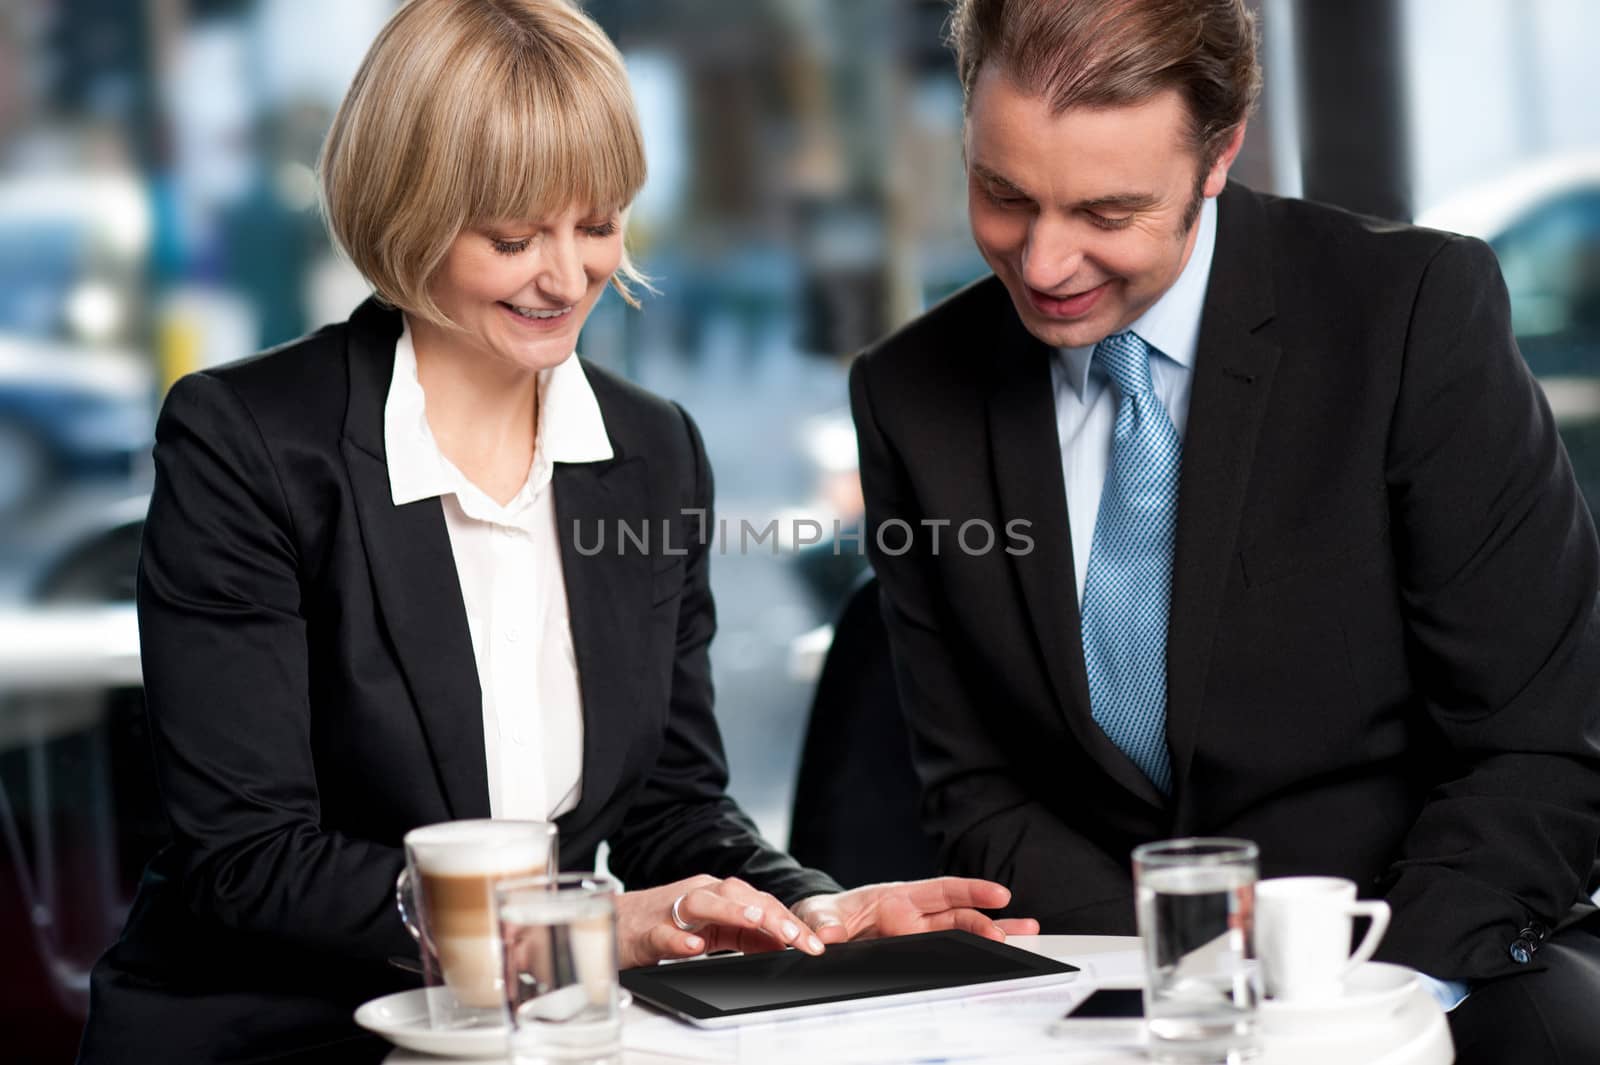 Business people having discussion at coffee table. Lady browsing on tablet device.